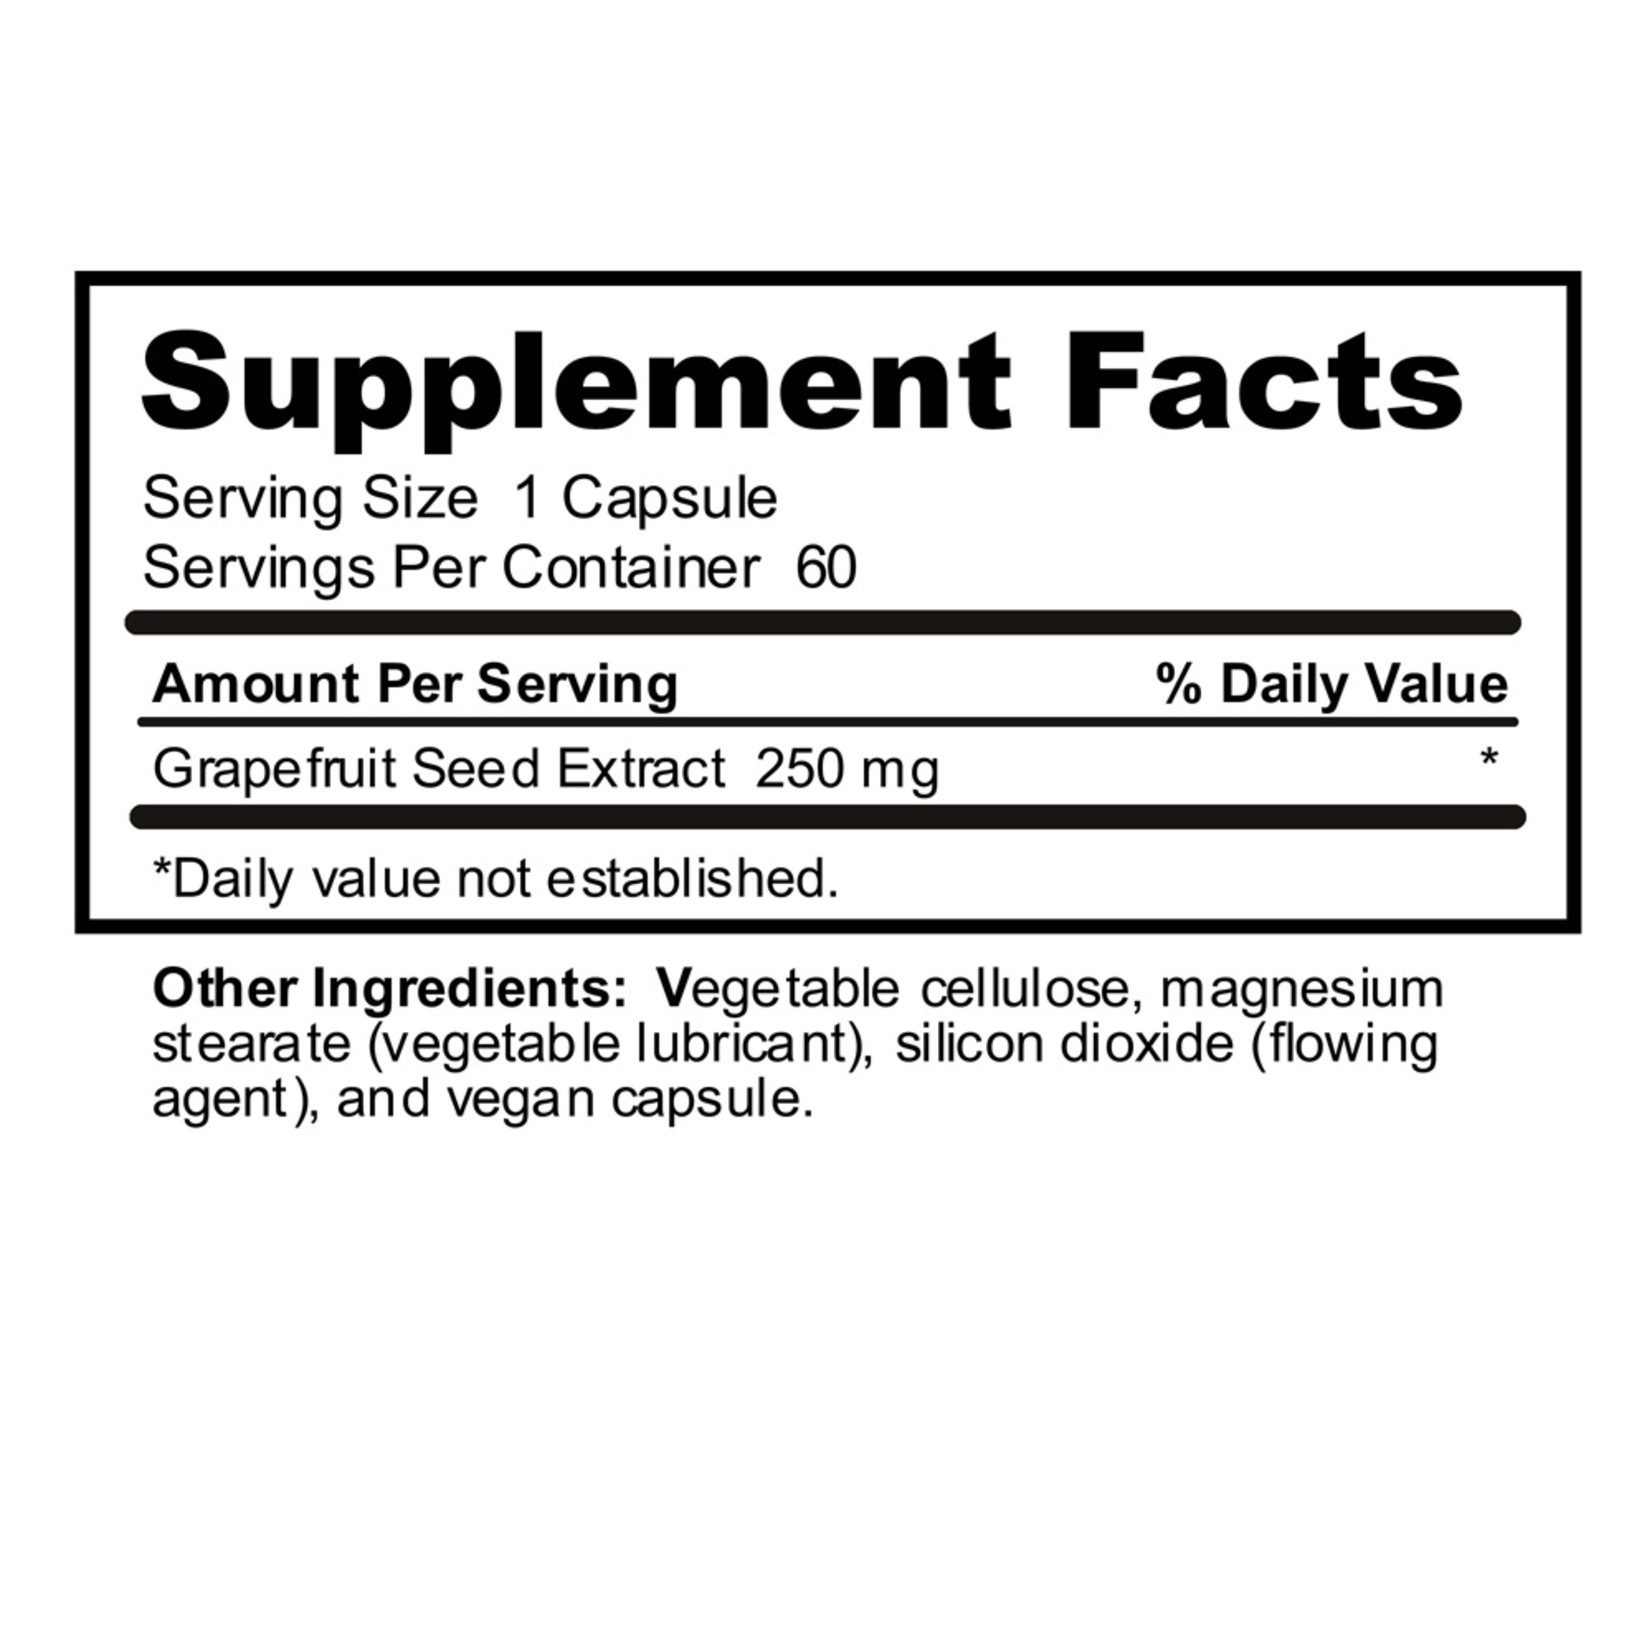 Nutribiotic Nutribiotic - Grapefruit Seed Concentrate 250 mg - 60 Capsules